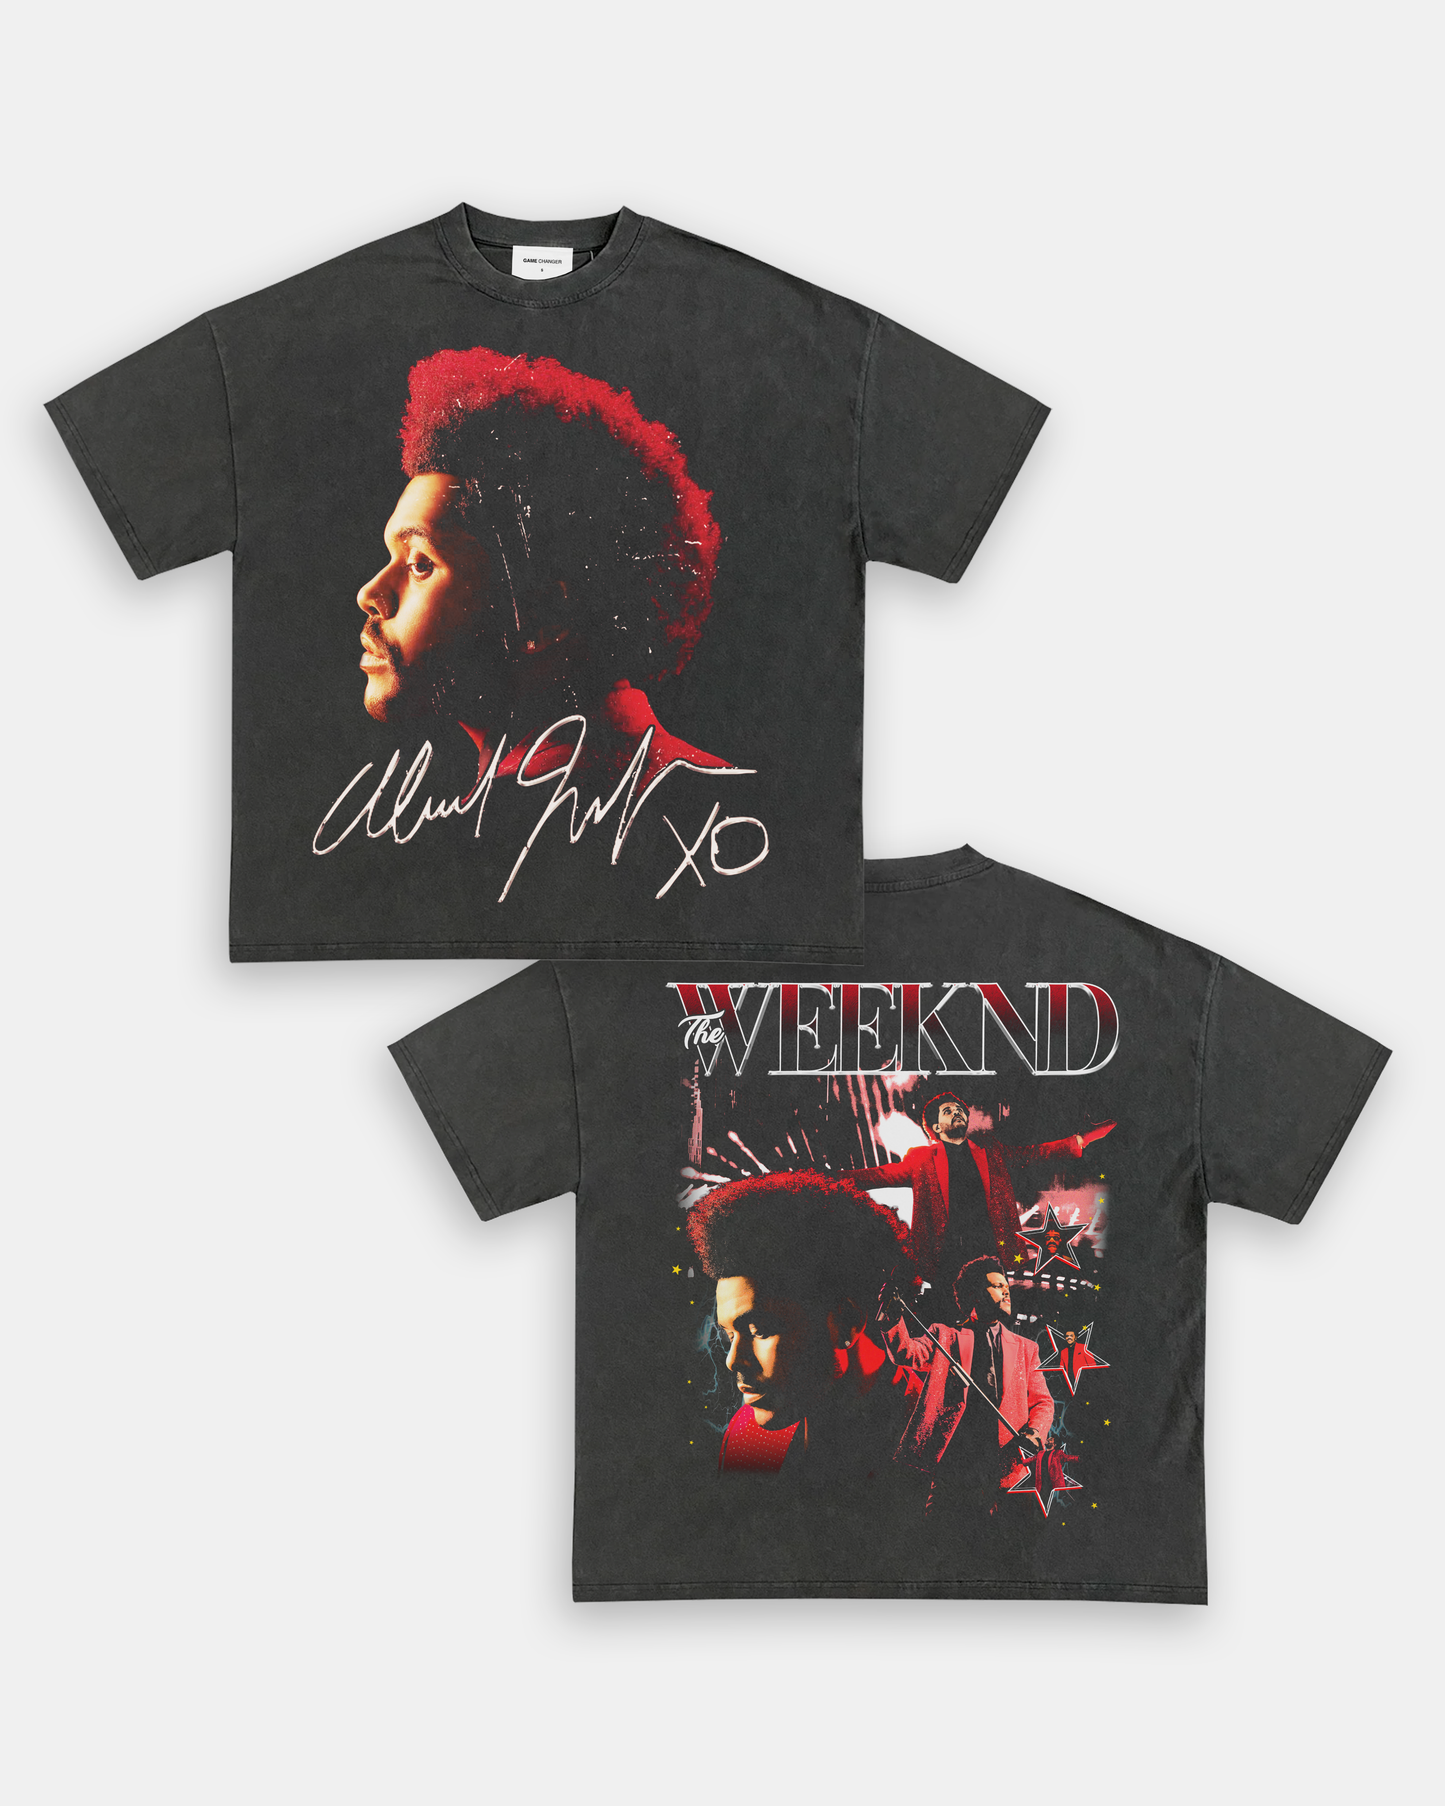 THE WEEKND 3 TEE - [DS]